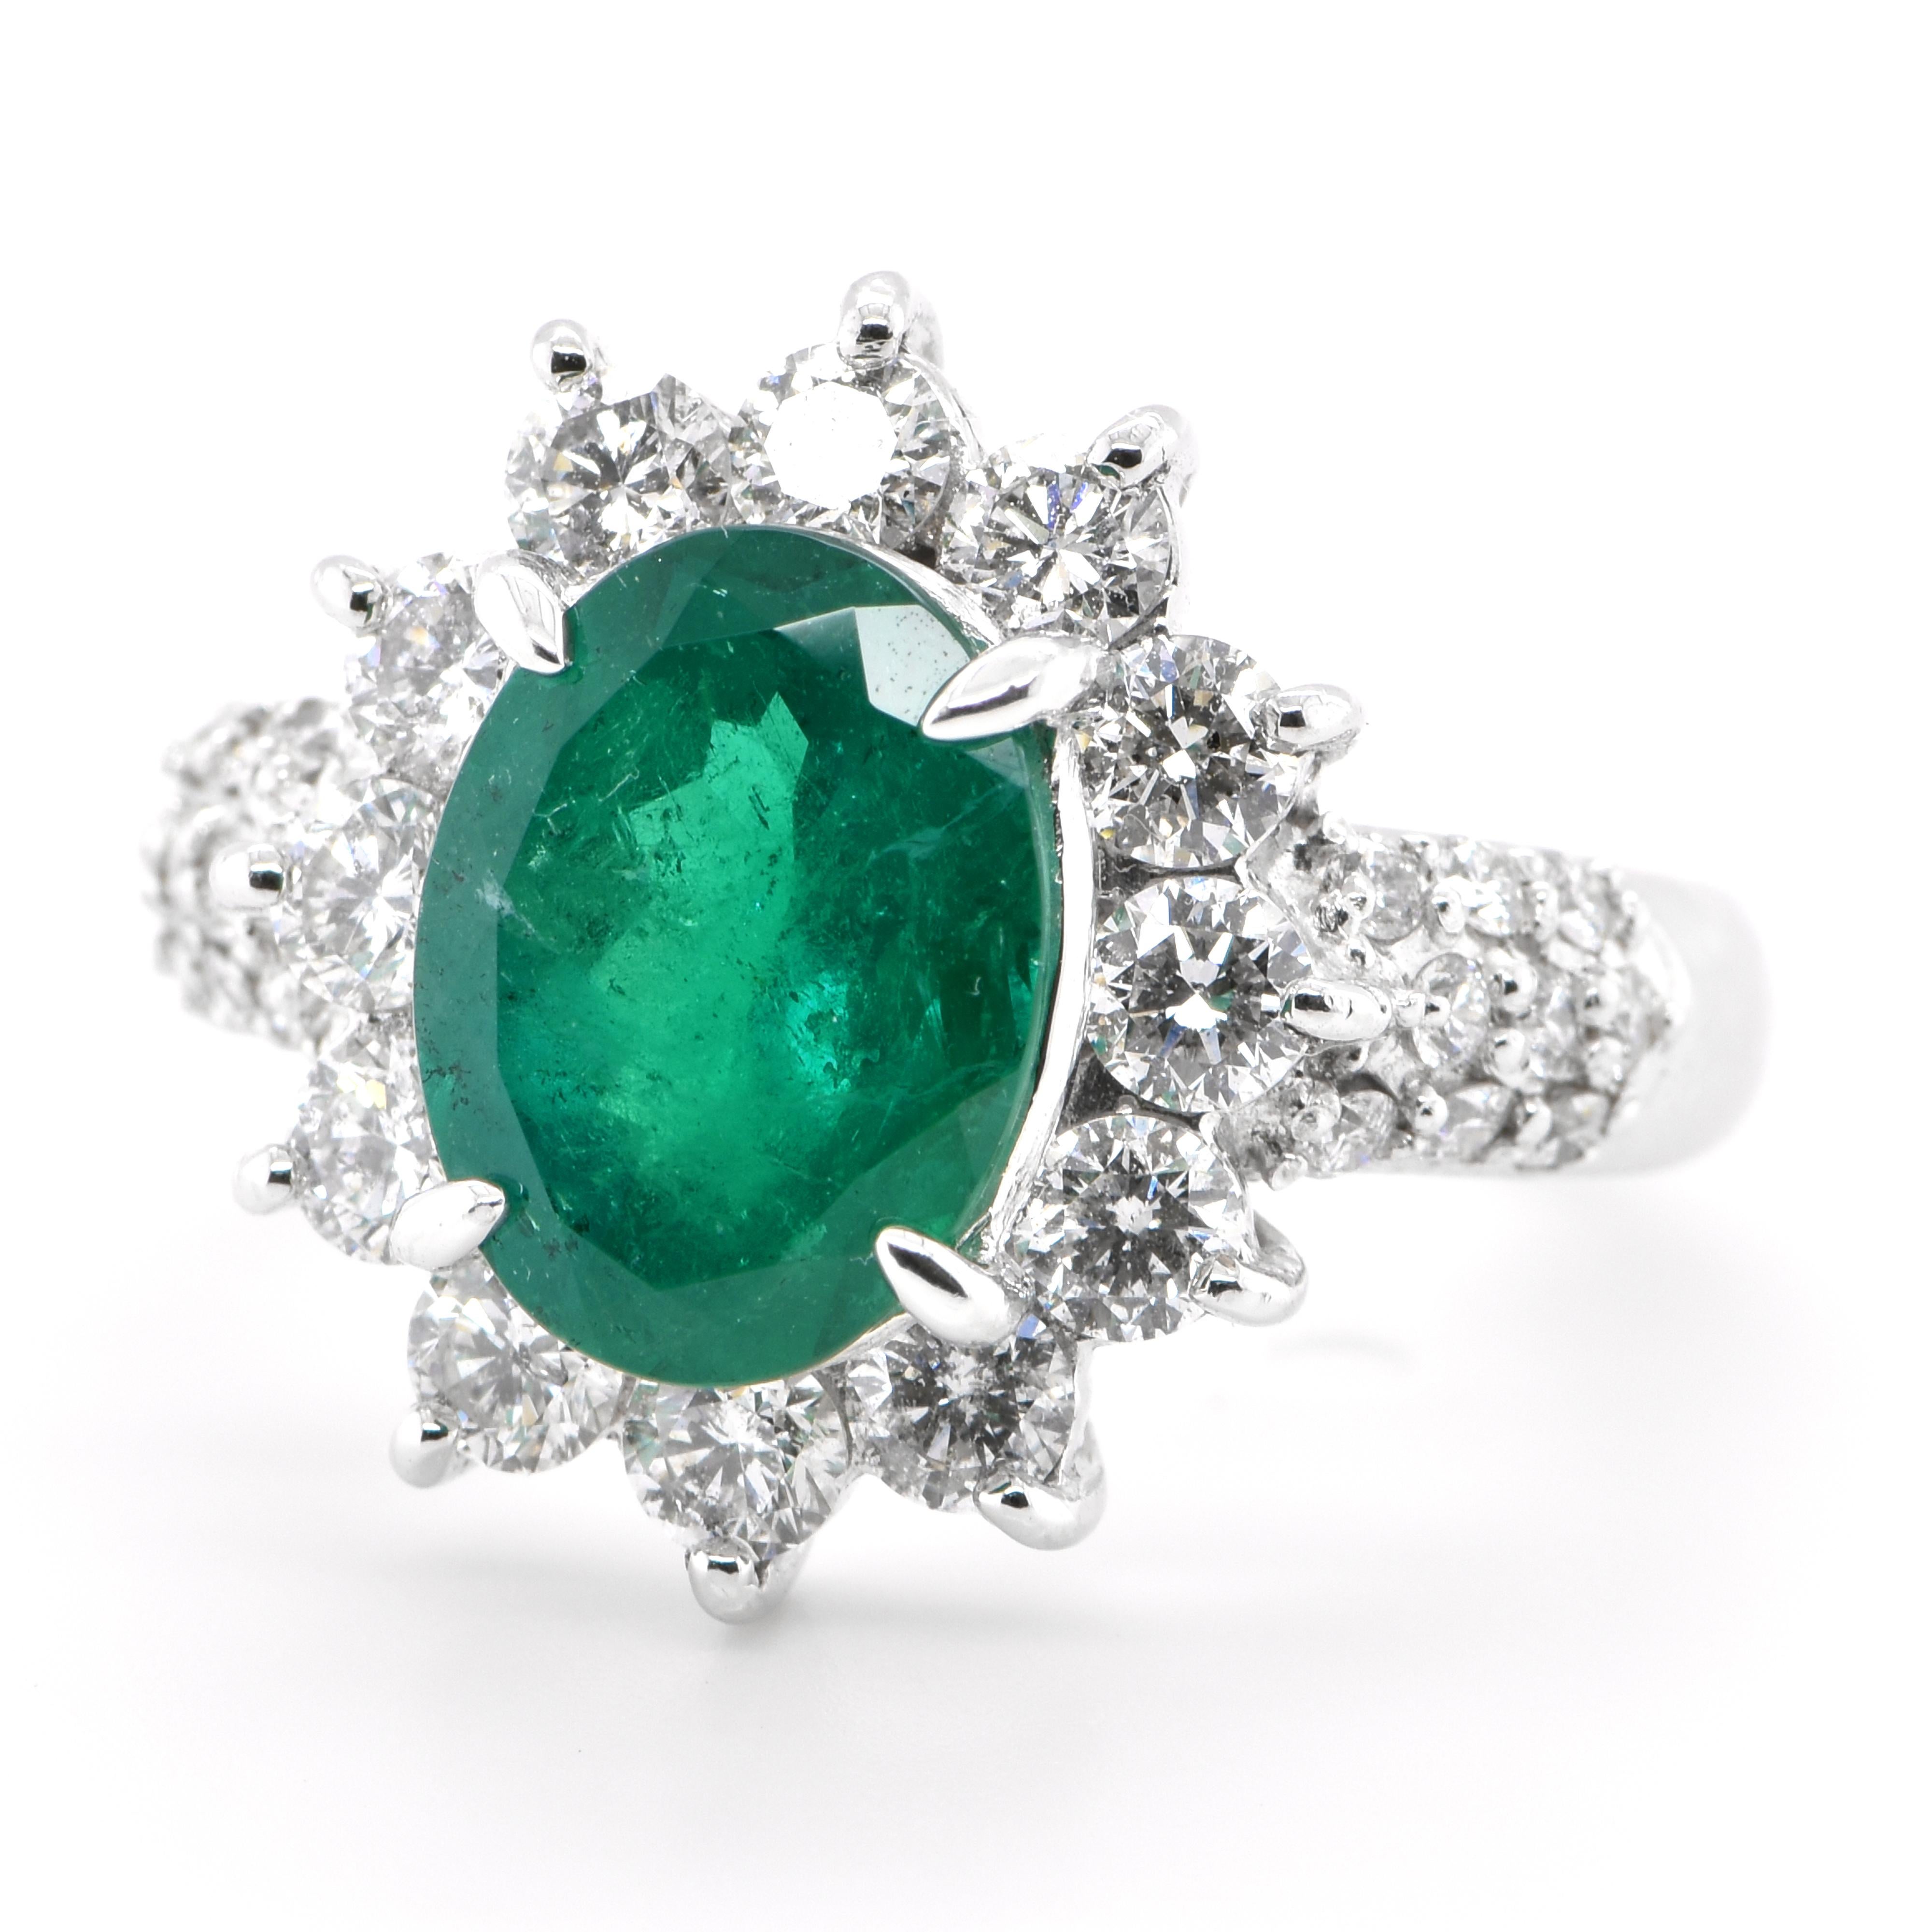 A stunning ring featuring a 2.61 Carat Natural Emerald and 1.36 Carats of Diamond Accents set in Platinum. People have admired emerald’s green for thousands of years. Emeralds have always been associated with the lushest landscapes and the richest